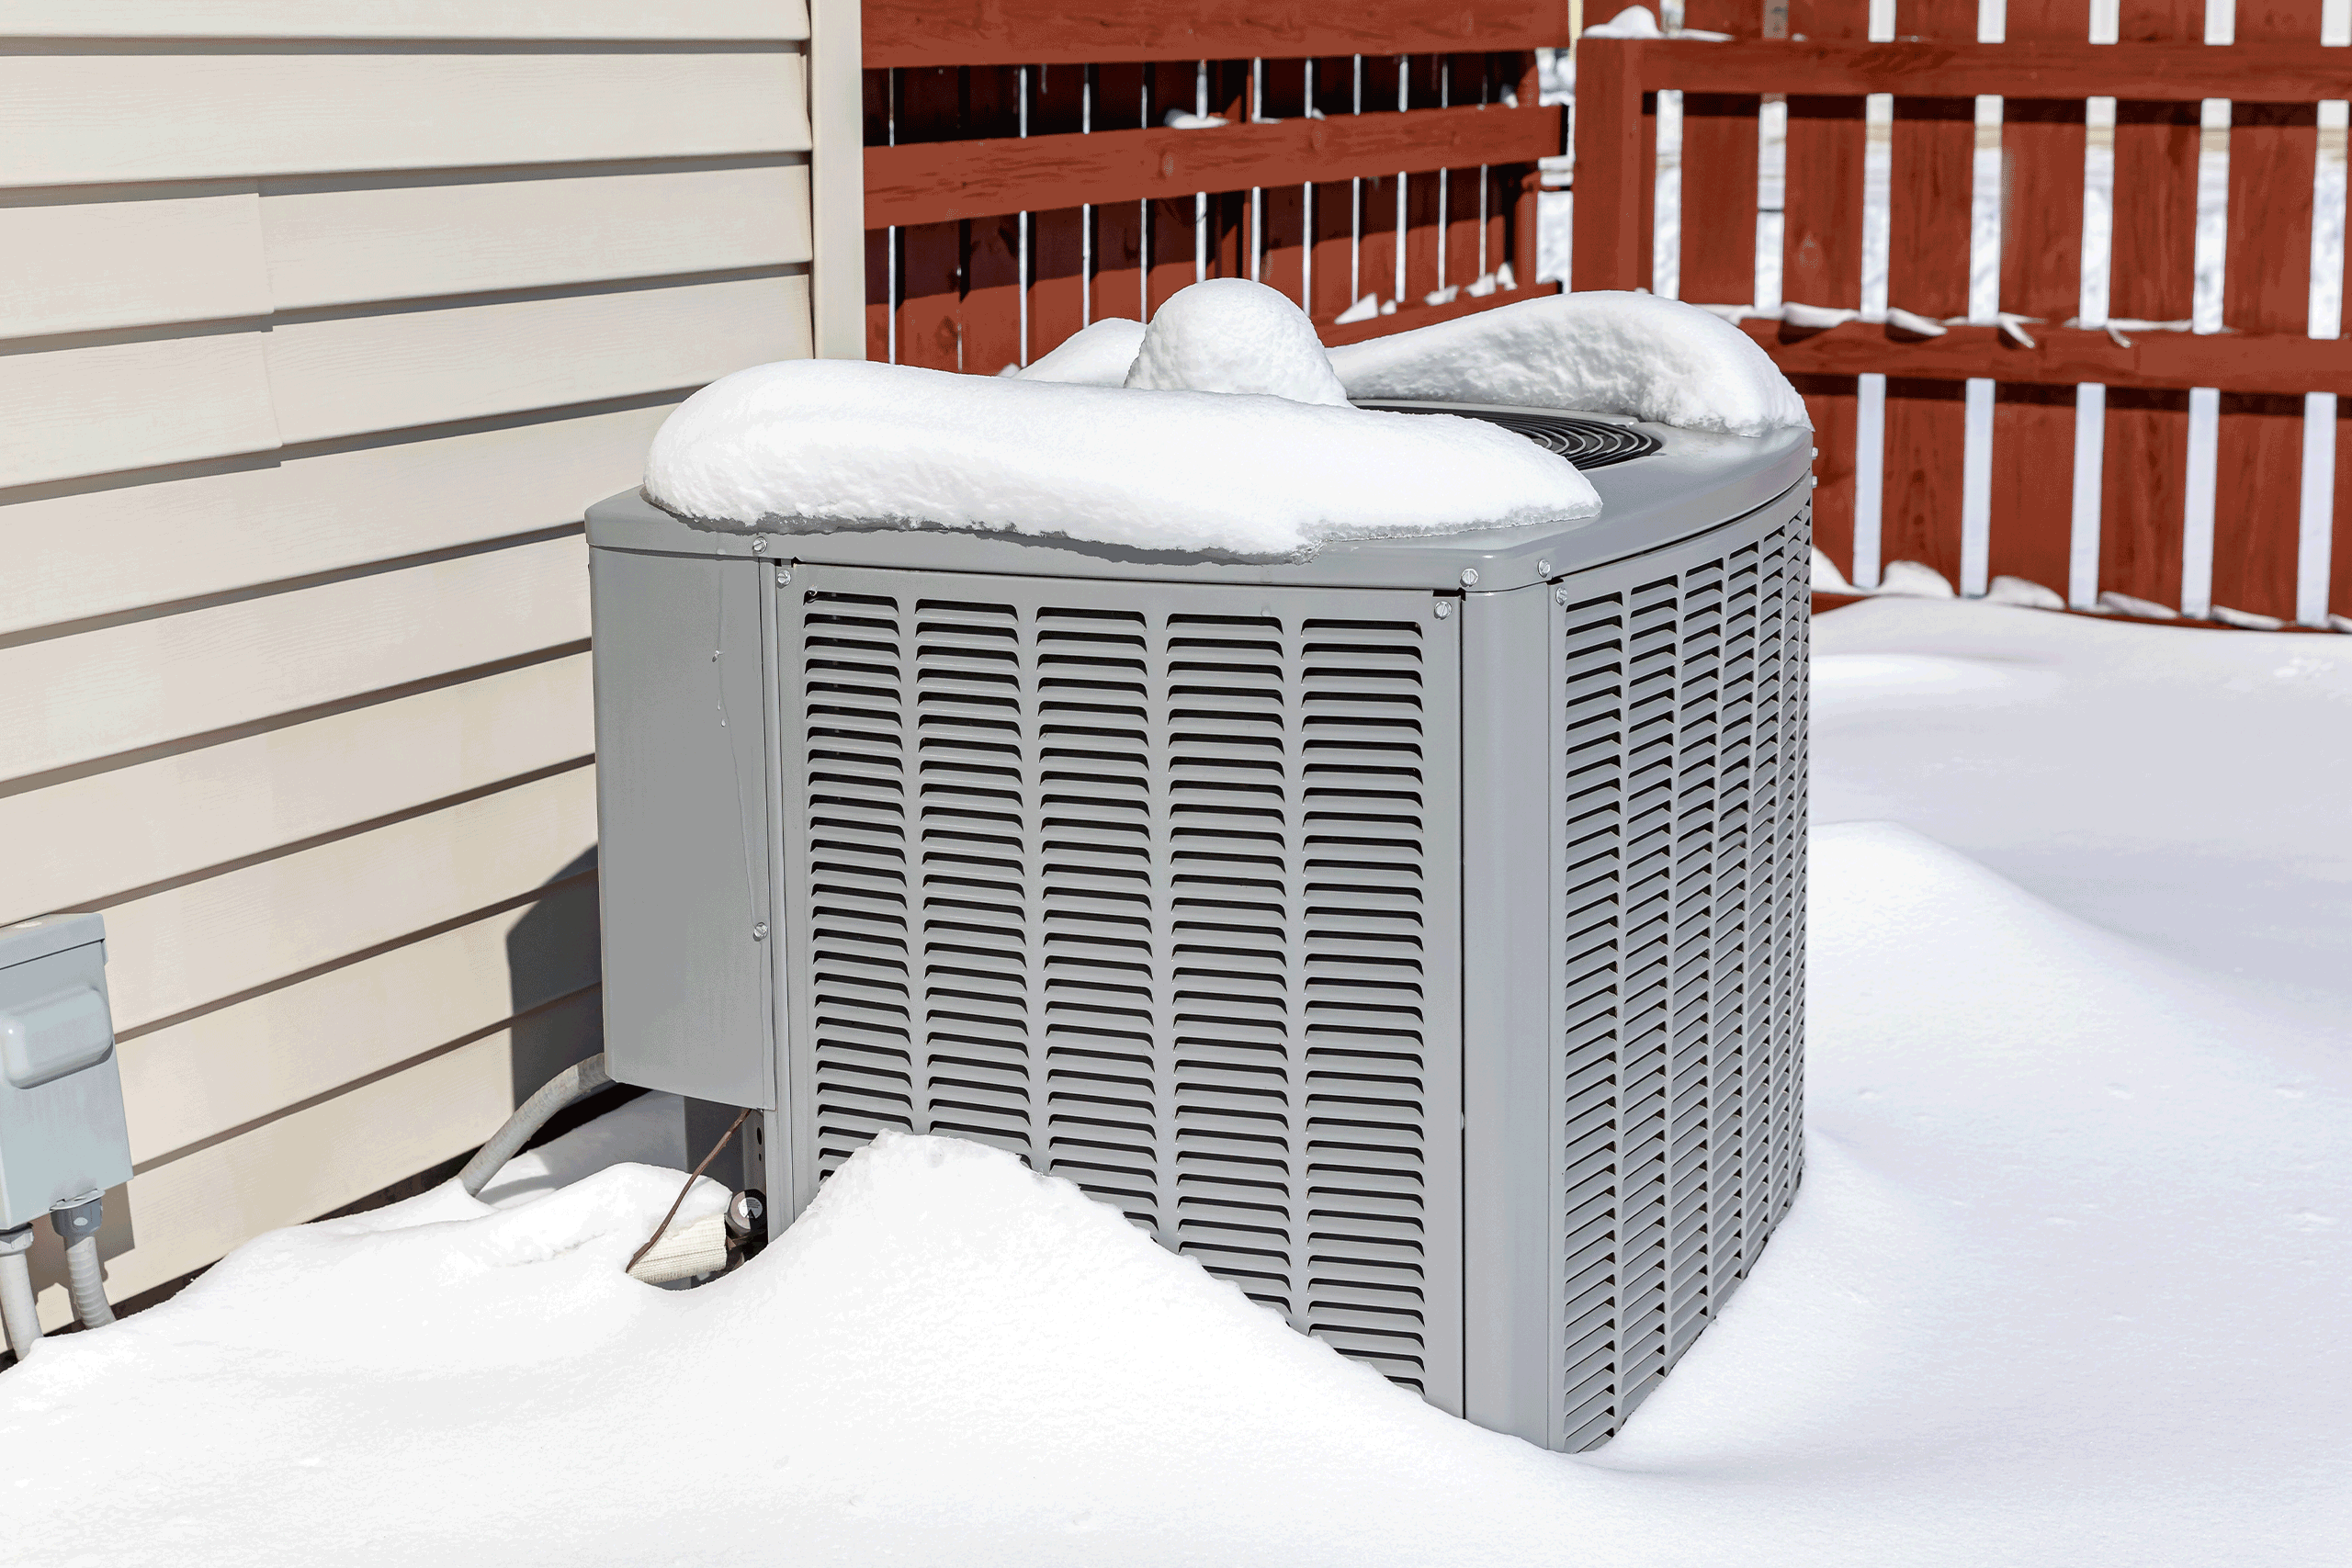 Beating the Elements in Kansas City: Expert Tips for Keeping Your HVAC System in Top Shape This Winter